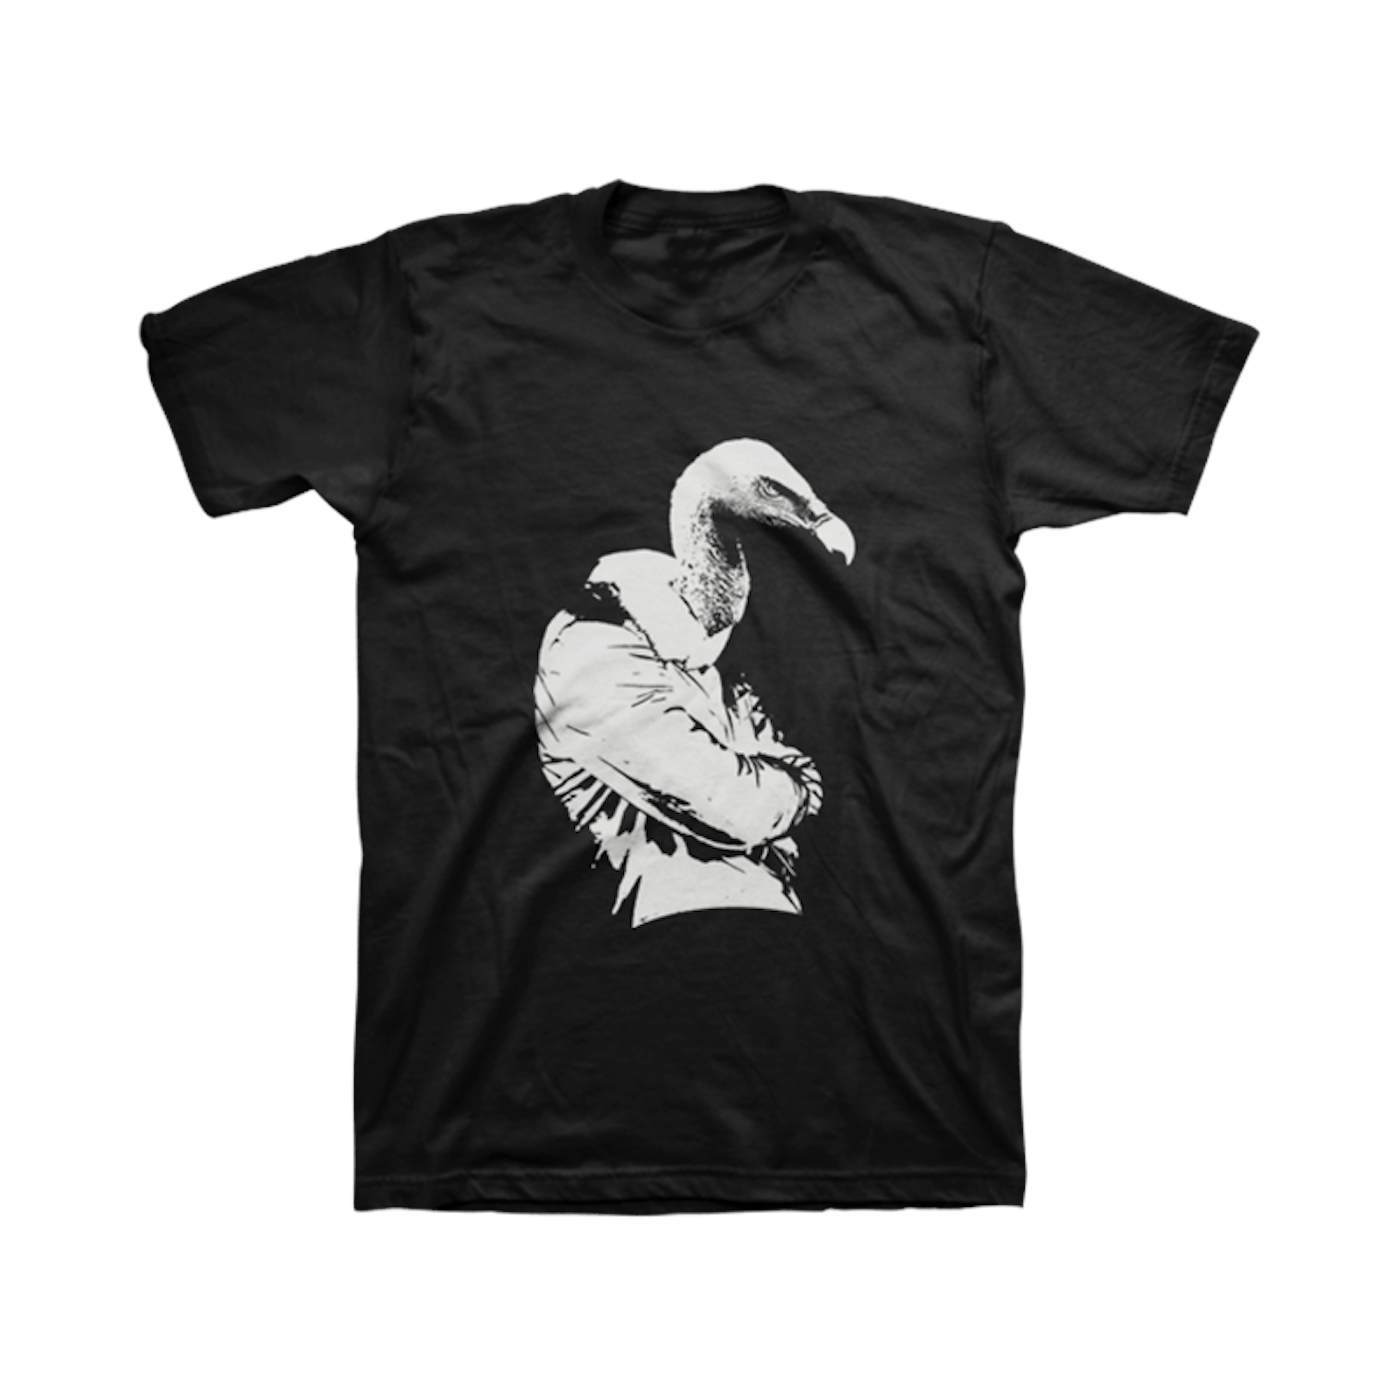 Them Crooked Vultures Grump Vulture Tee